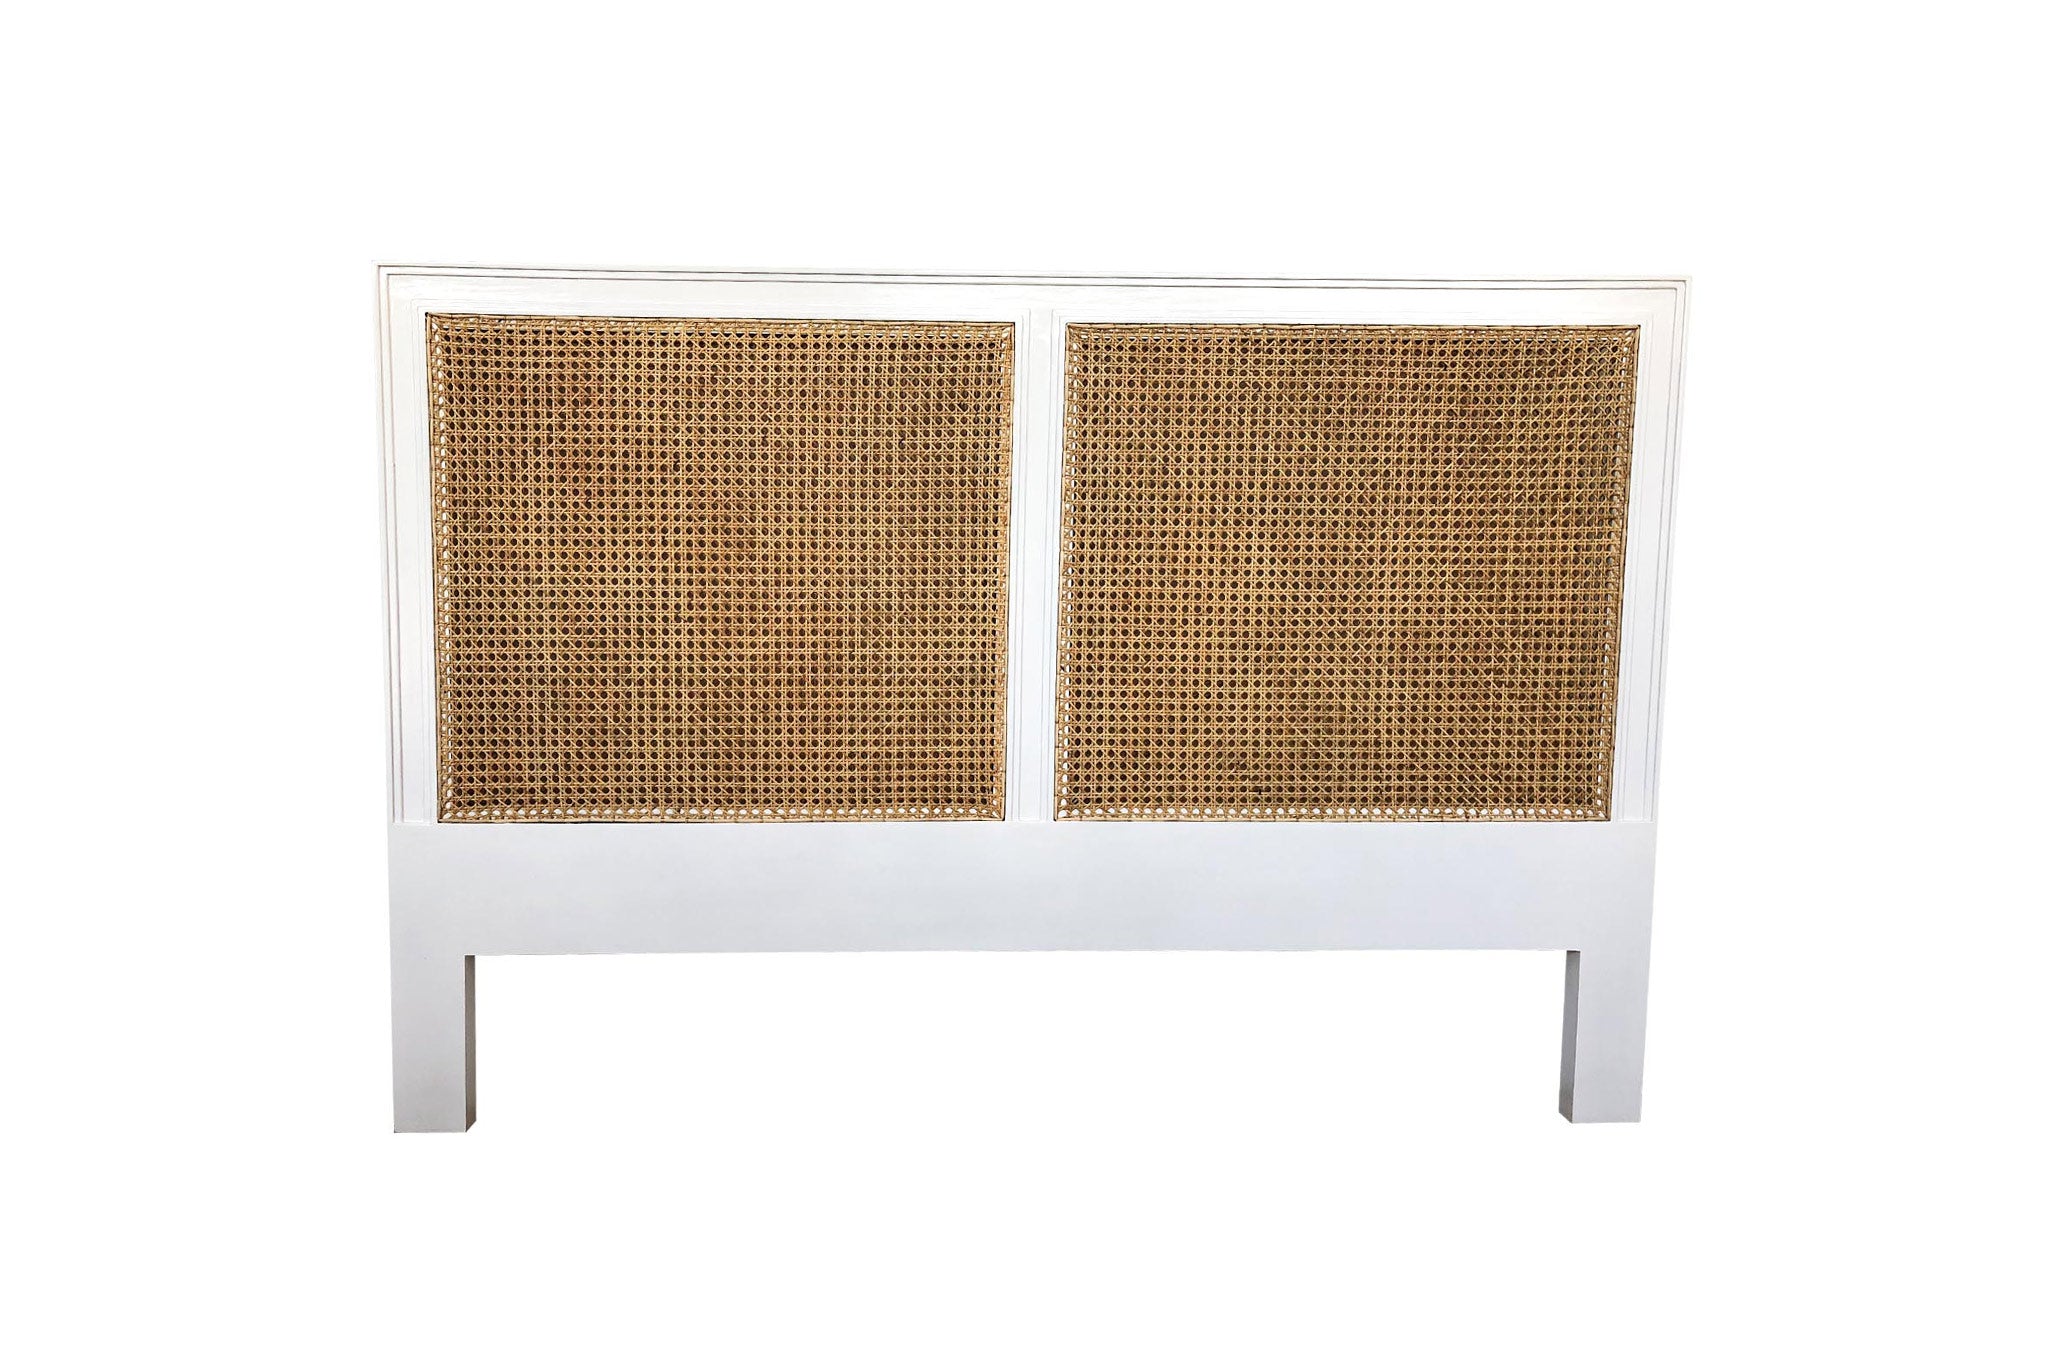 Vaucluse Rattan & Mahogany Bedhead – Queen Size – White